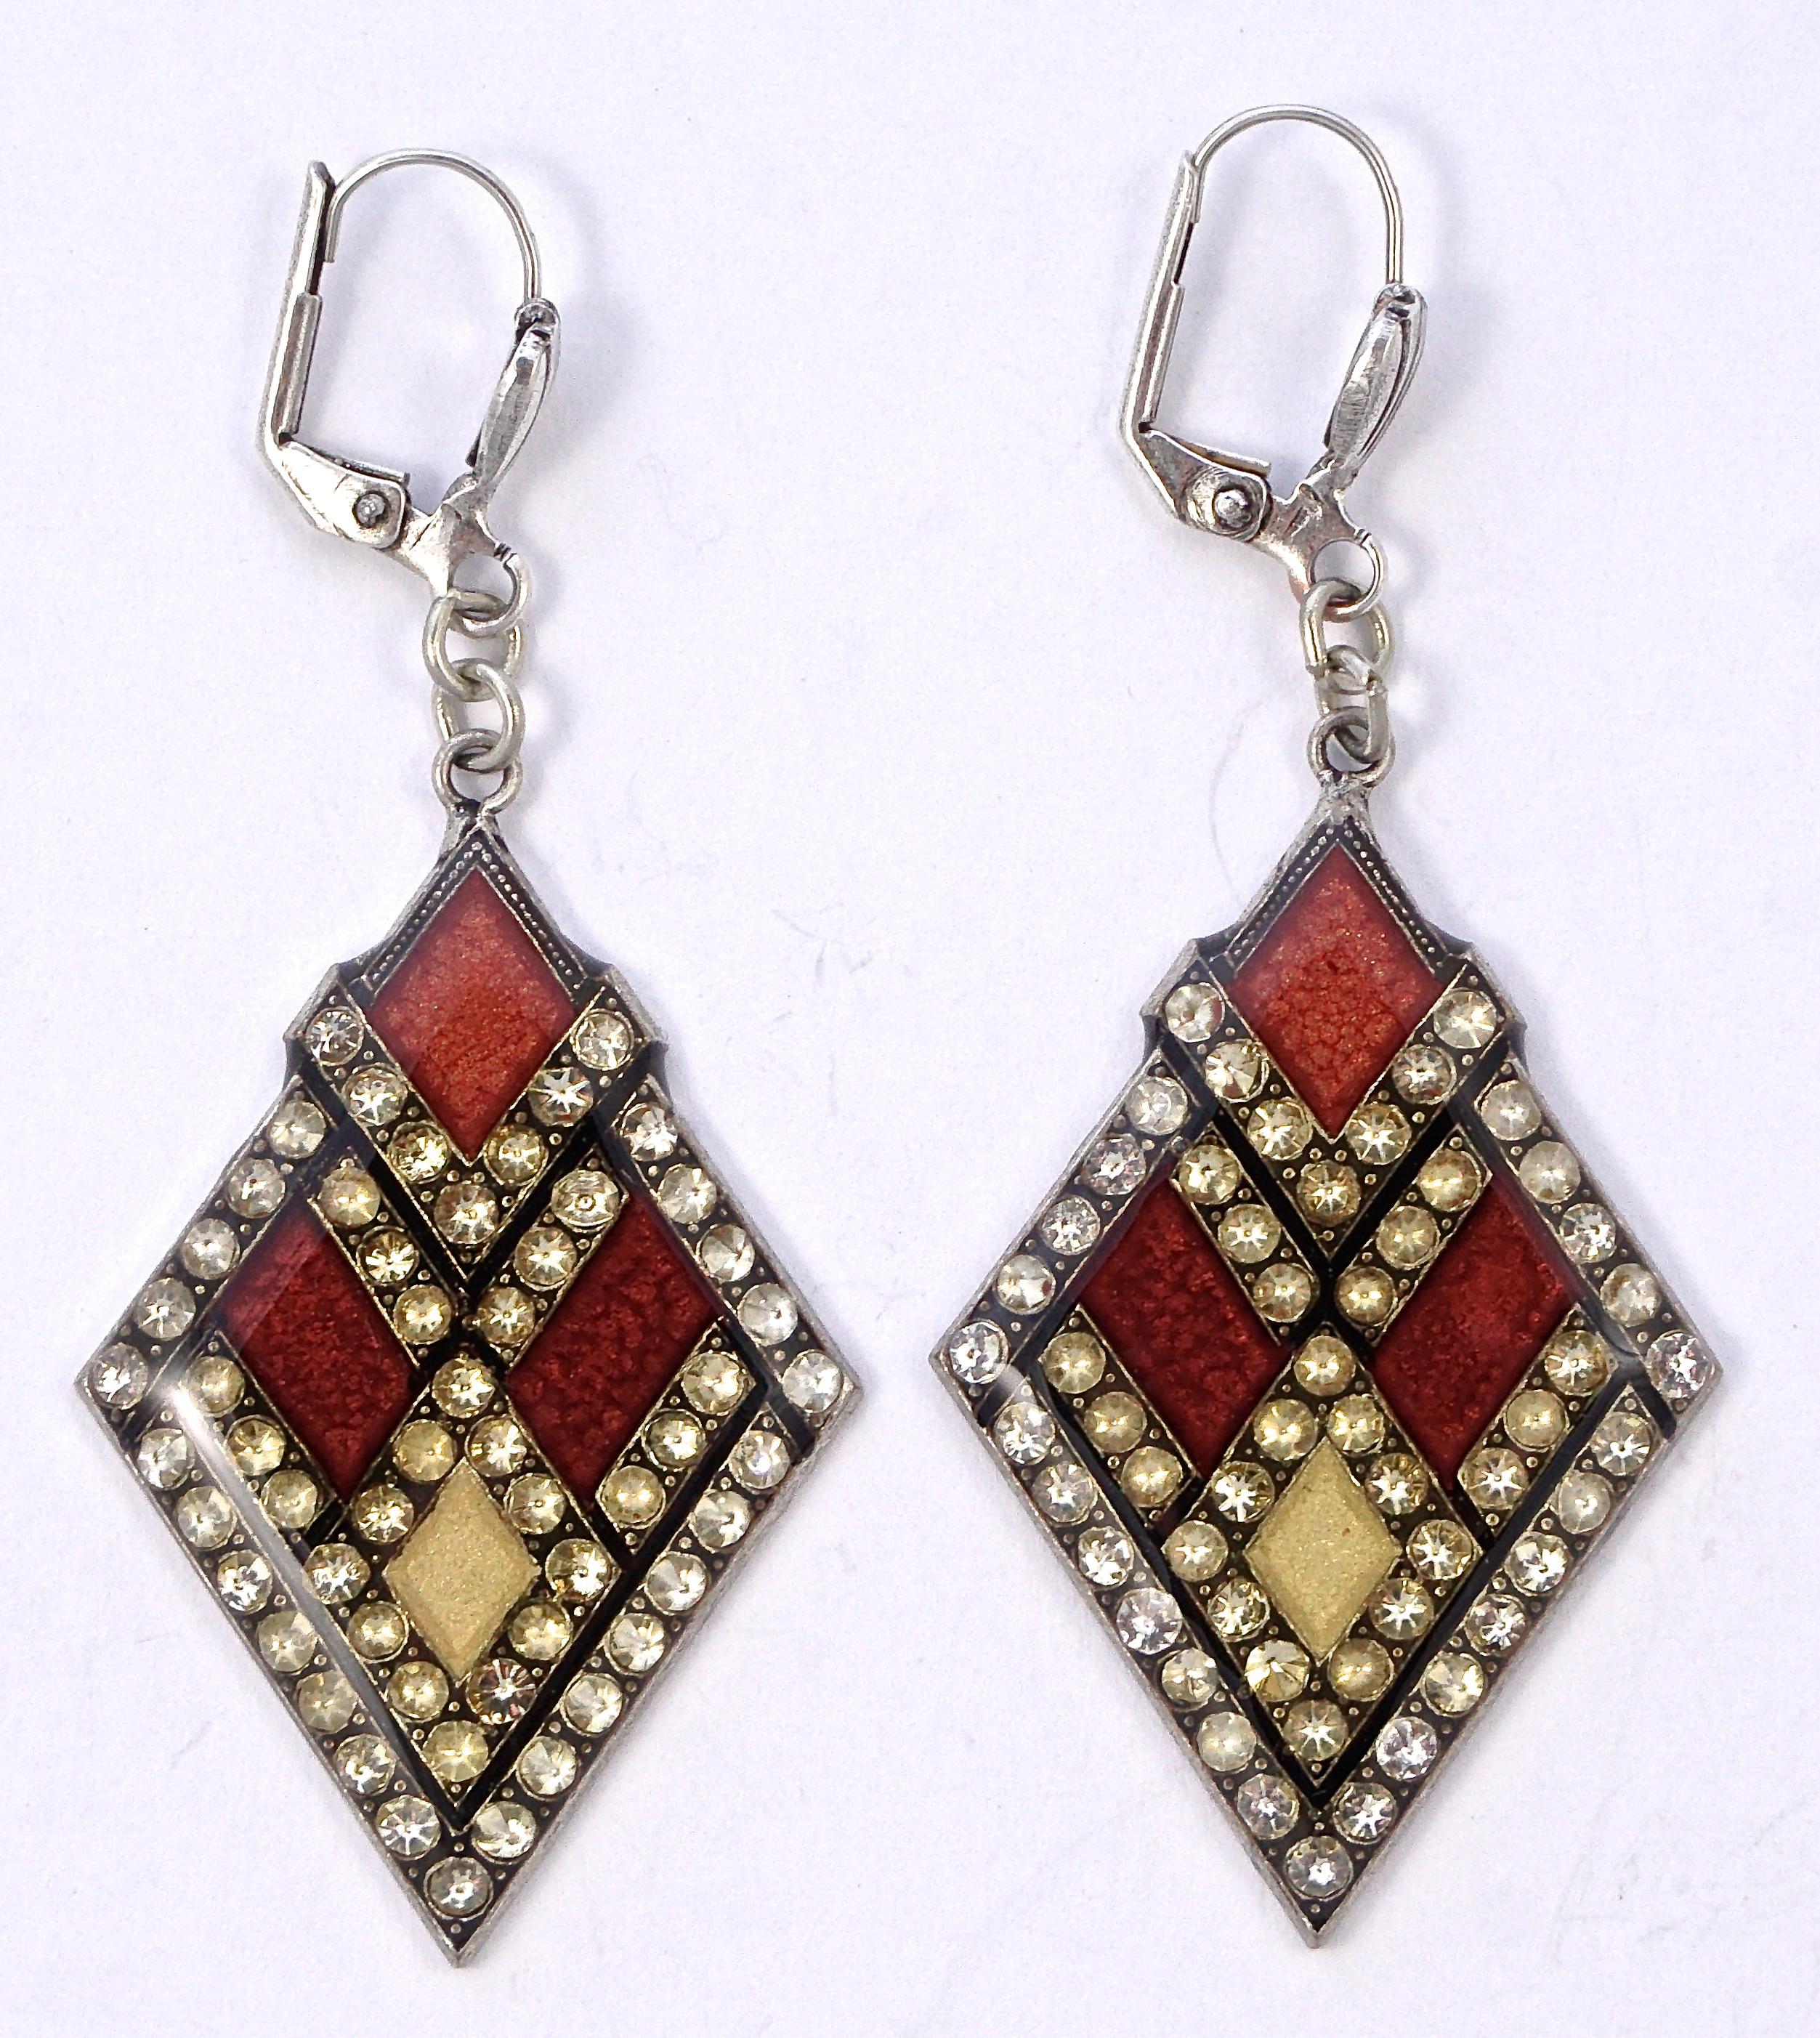 Fabulous Pierre Bex antique finish silver plated Art Deco style lever back earrings. The lovely diamond shaped drops are embellished with crystal rhinestones, and feature textured burnt orange and pale yellow enamel. The drops measure length 4.1cm /